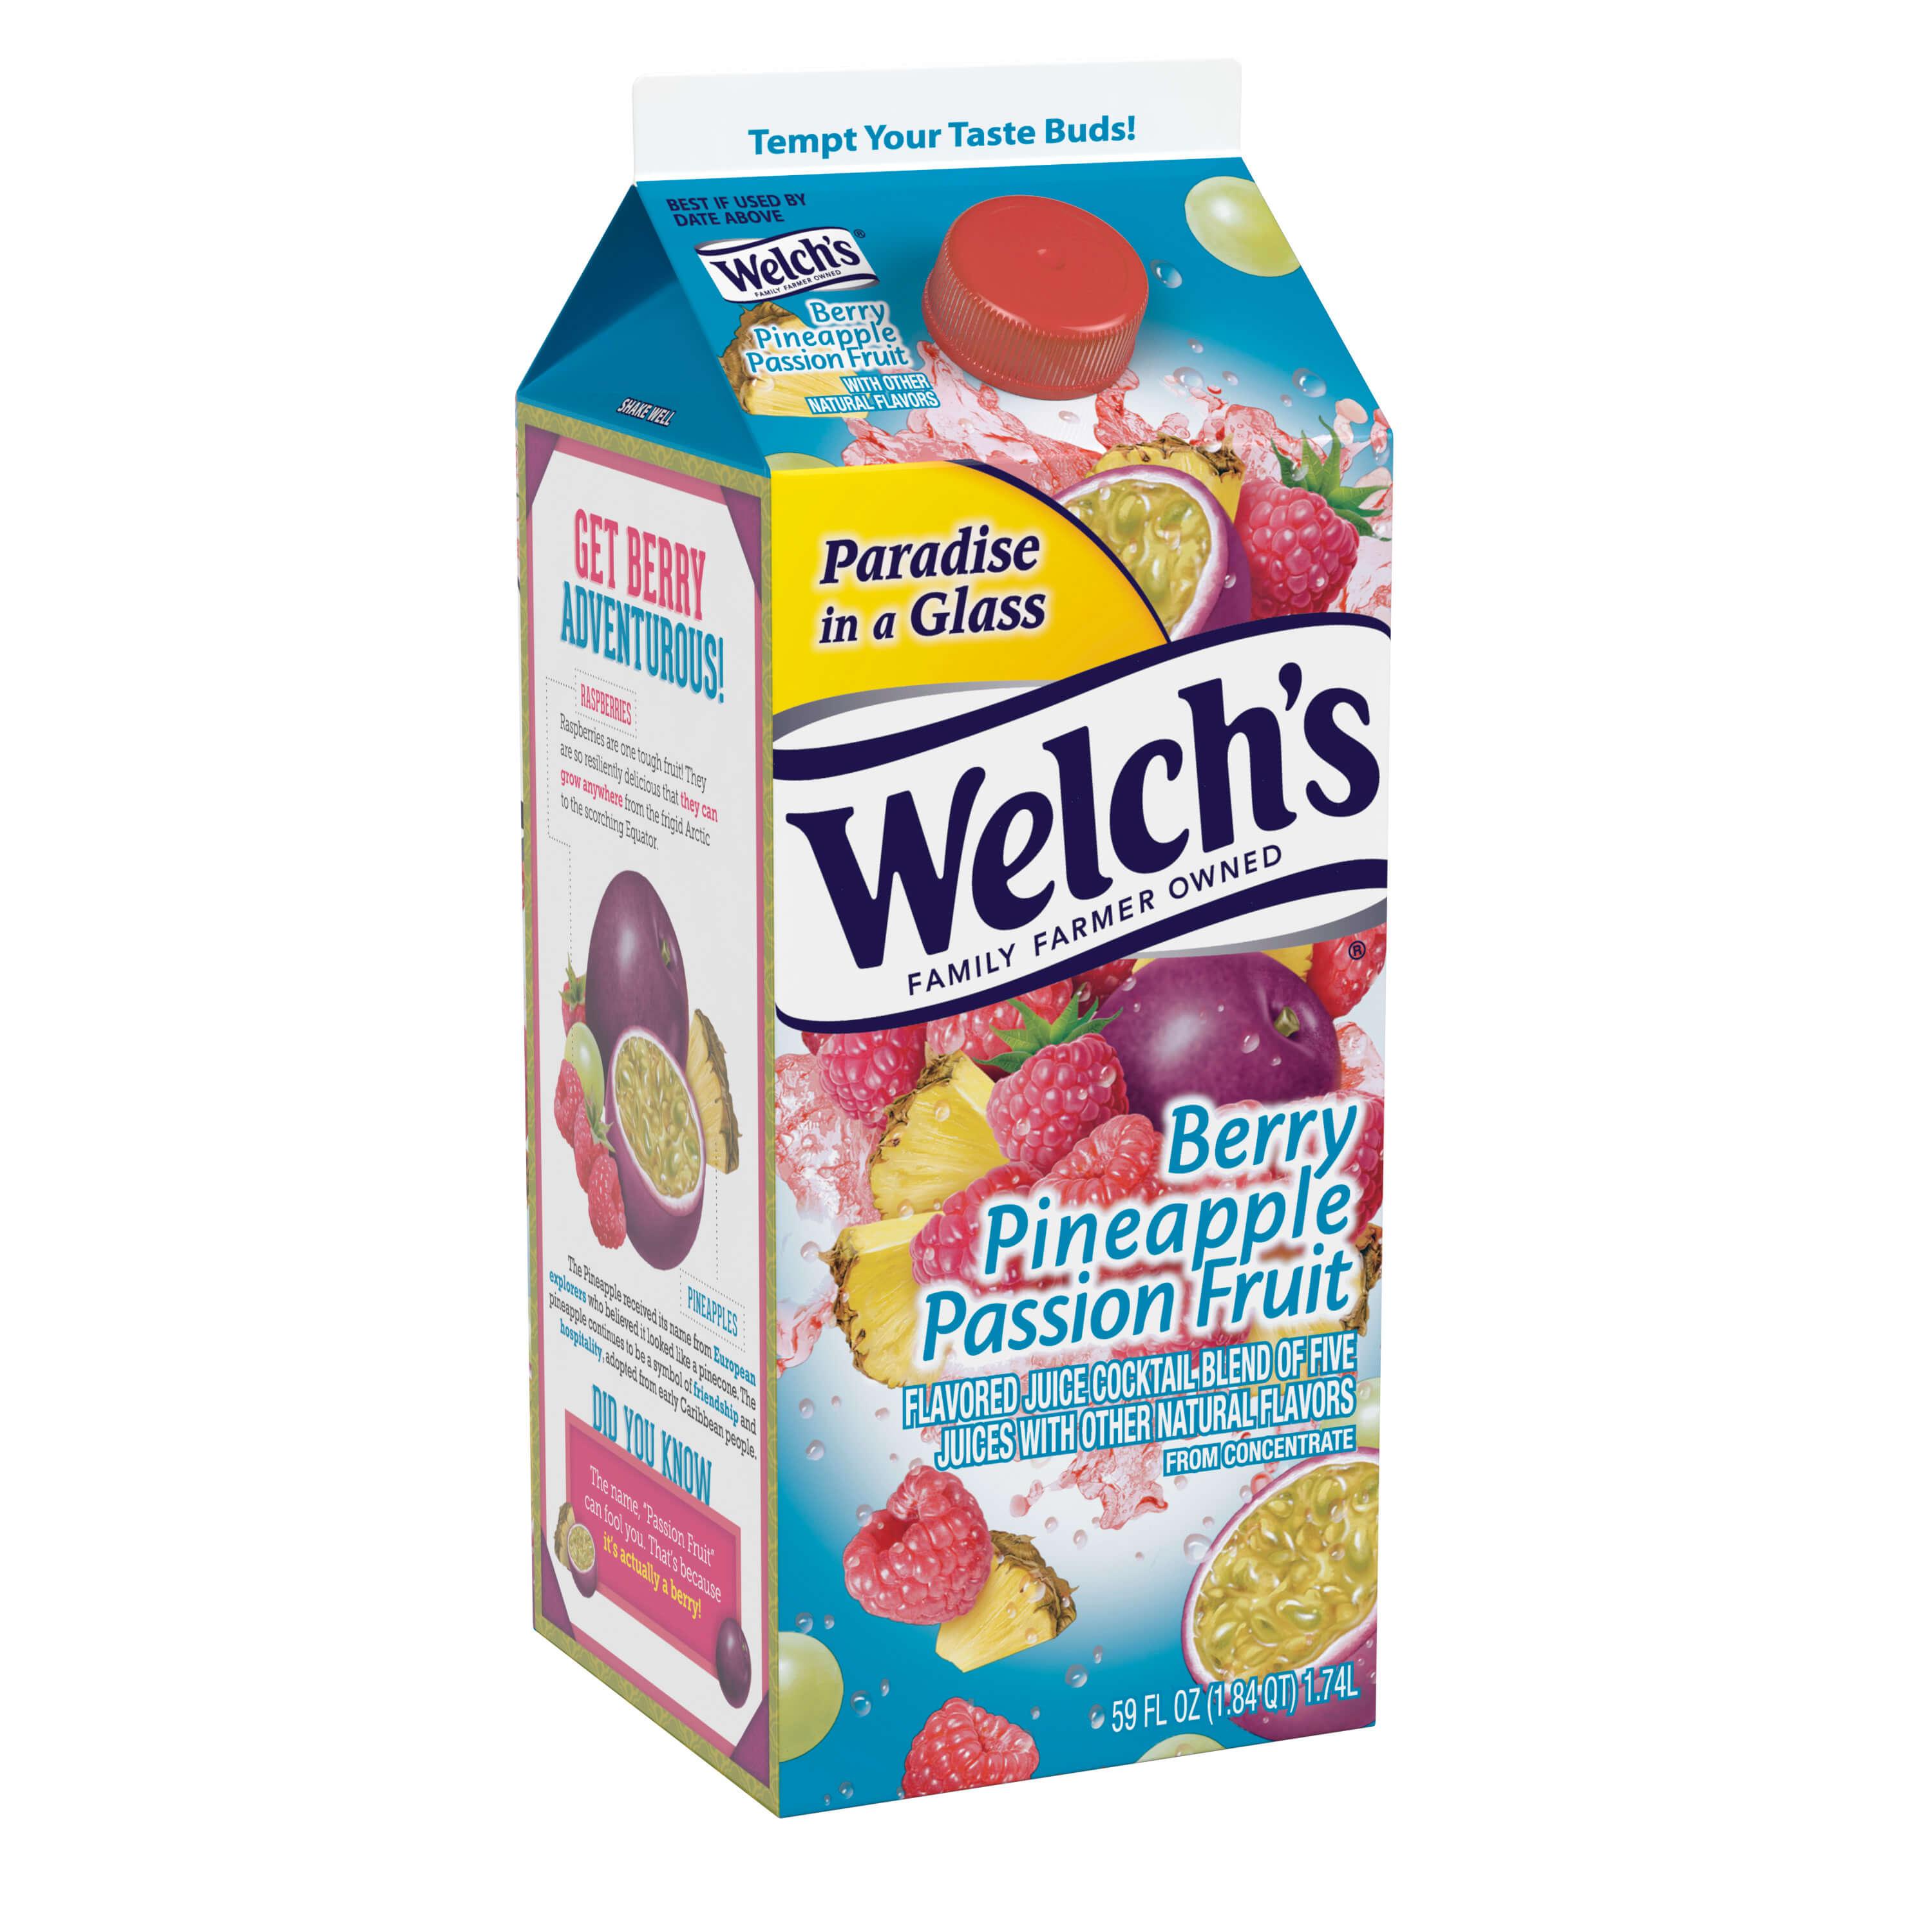 Welch's - Berry Pineapple Passion Fruit 59oz